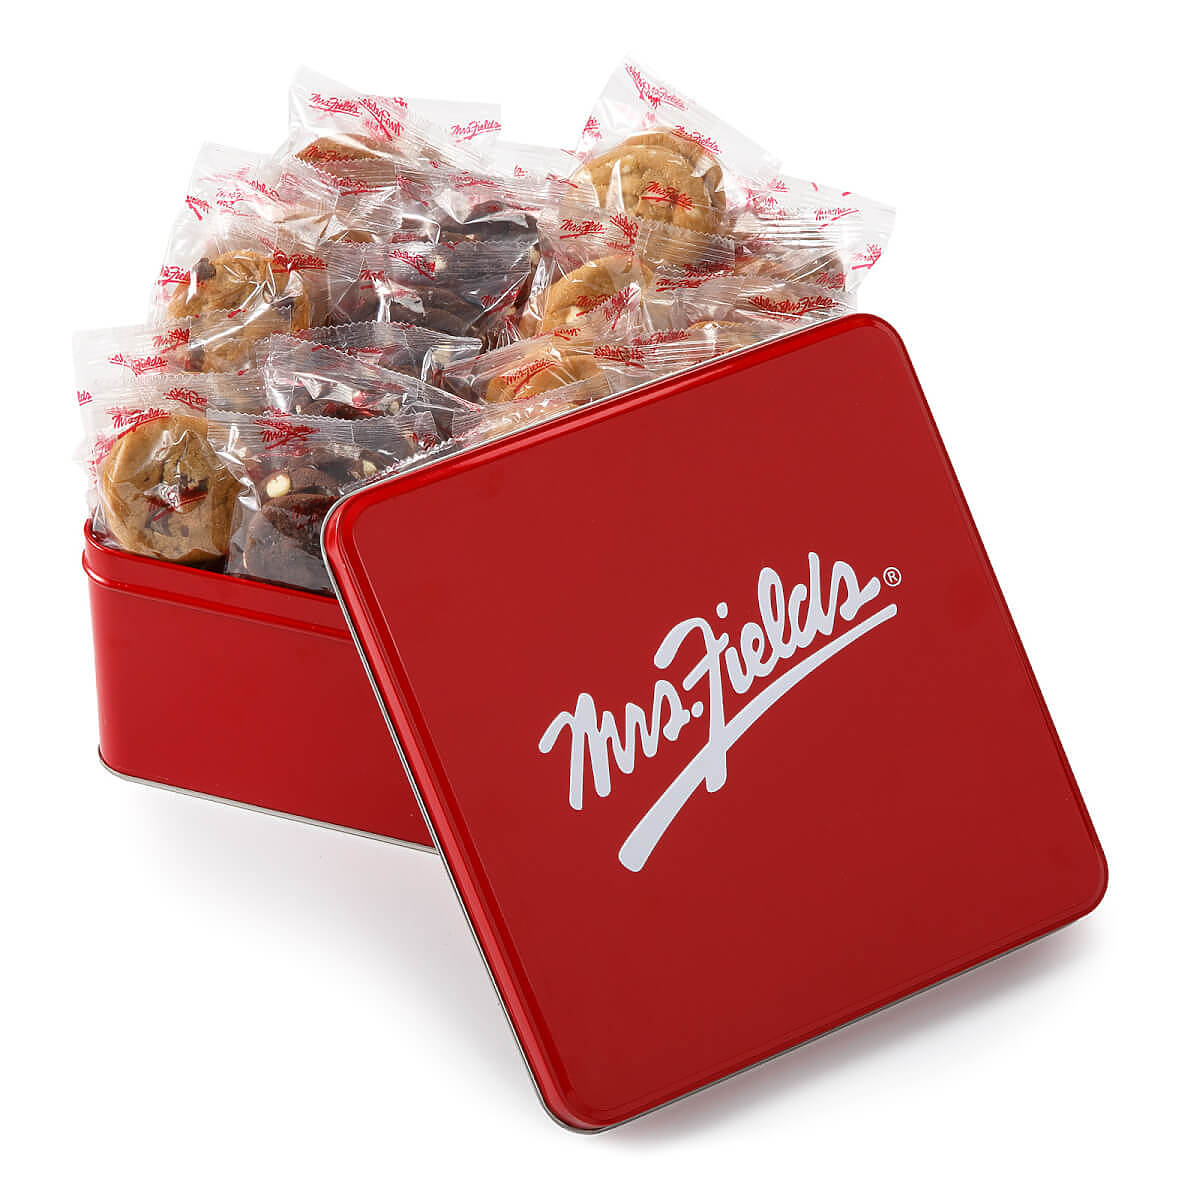 A red Mrs. Fields signature tin filled with an assortment of packaged nibblers